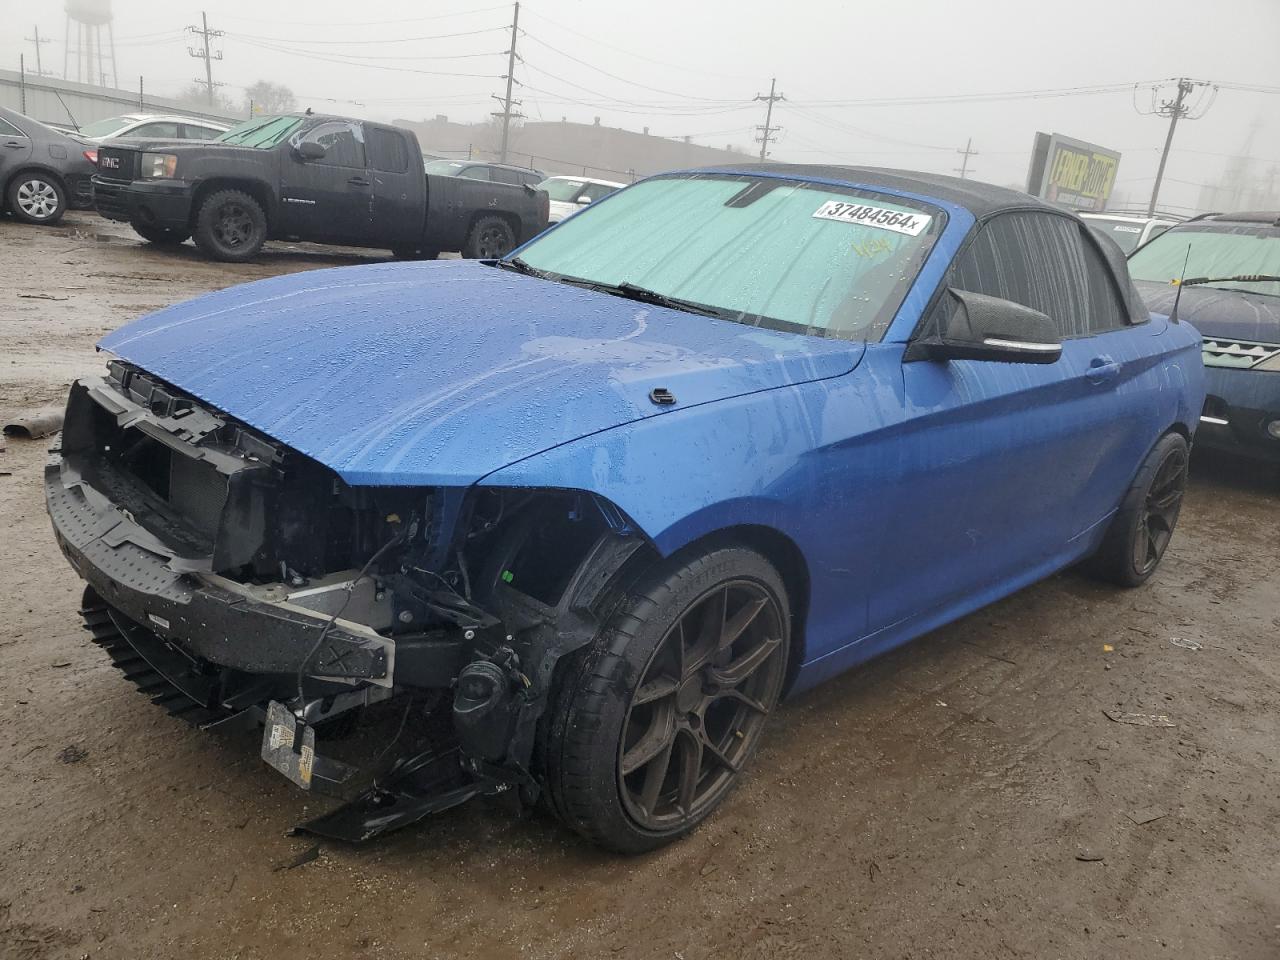 vin: WBA2L1C3XHV666595 WBA2L1C3XHV666595 2017 bmw m2 3000 for Sale in 60411 5546, Il - Chicago South, Chicago Heights, USA